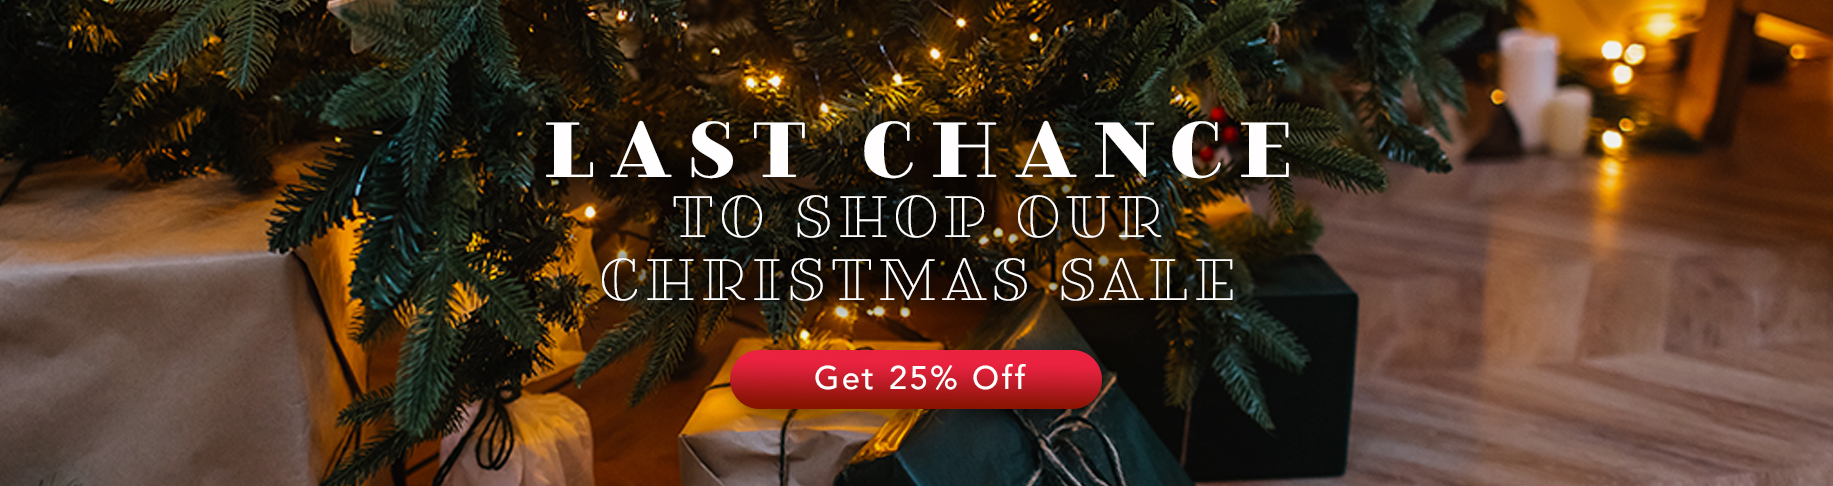 Last Chance to Shop Our Christmas Sale - Get 25% Off